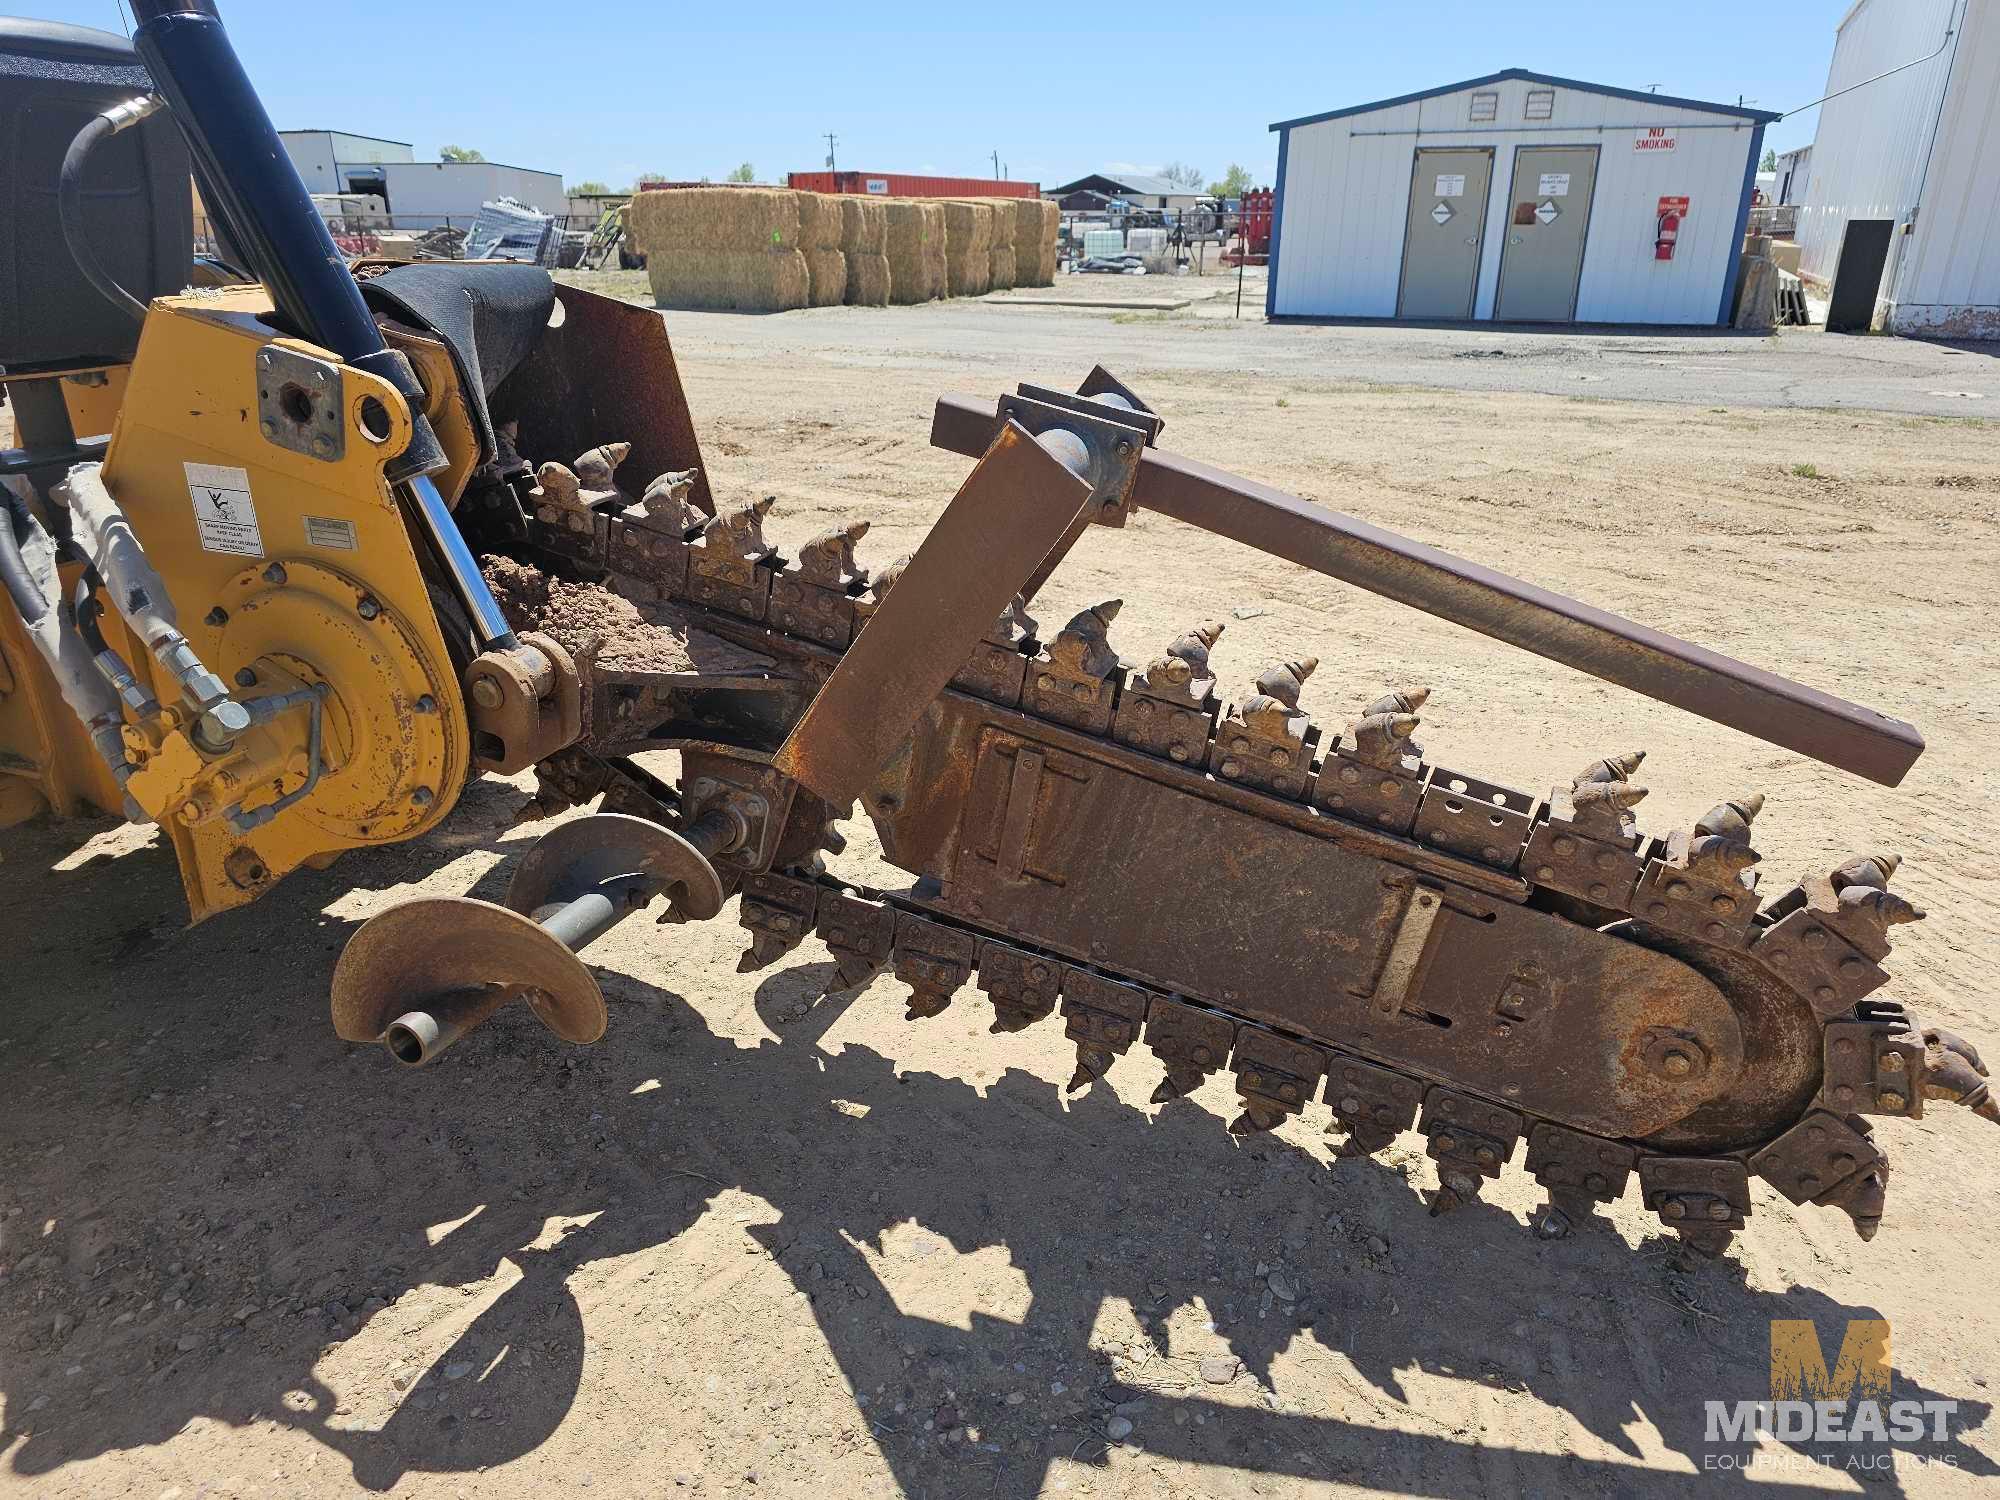 CASE 560 Trencher